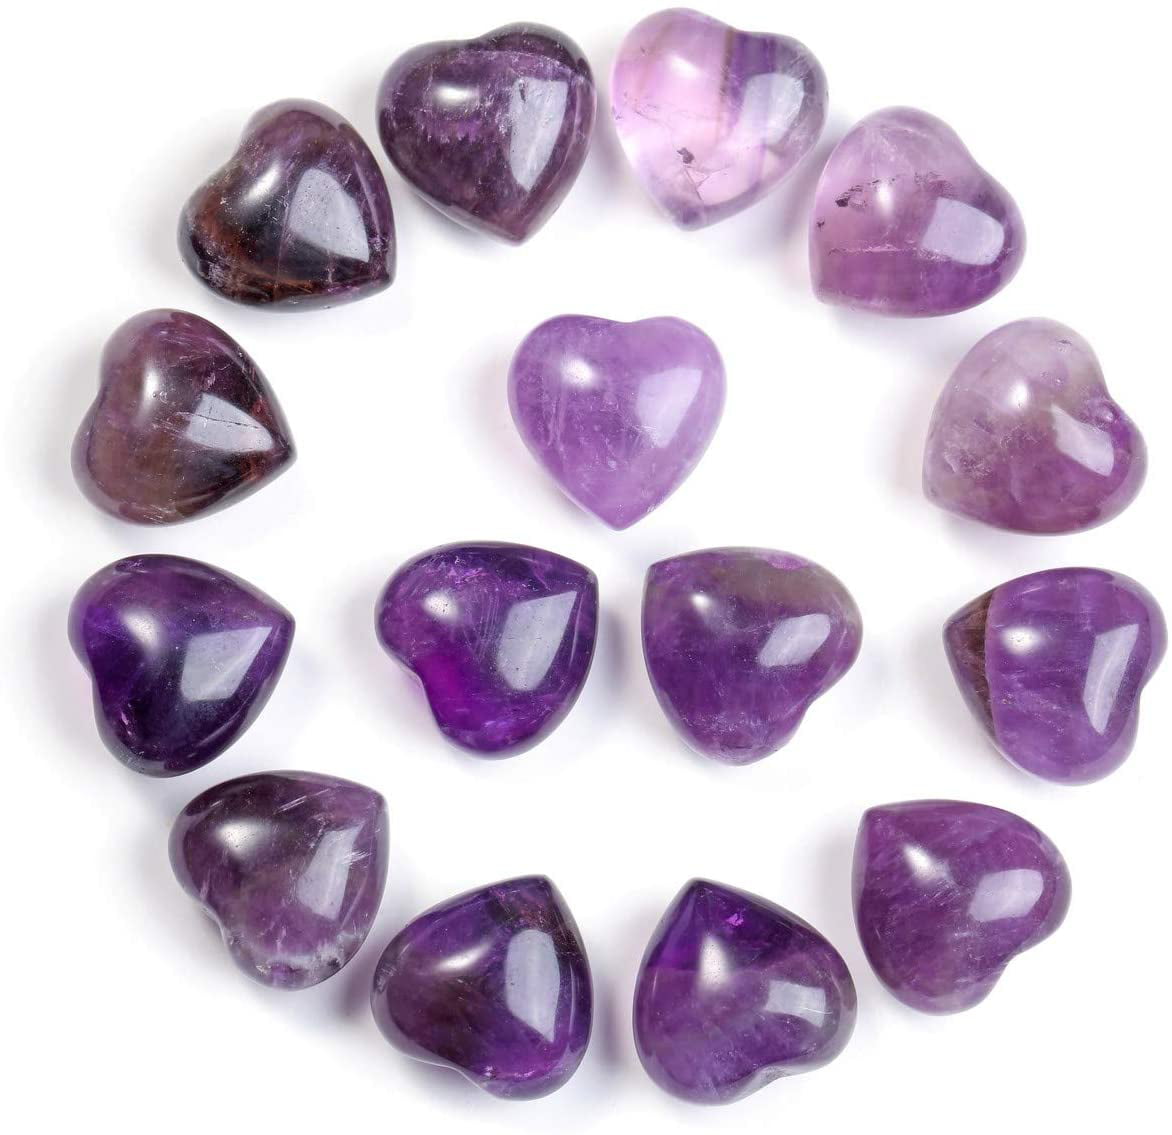 TRUTH REVEALED Tumbled Crystal Healing Set = 4 Stones Description Card Pouch 